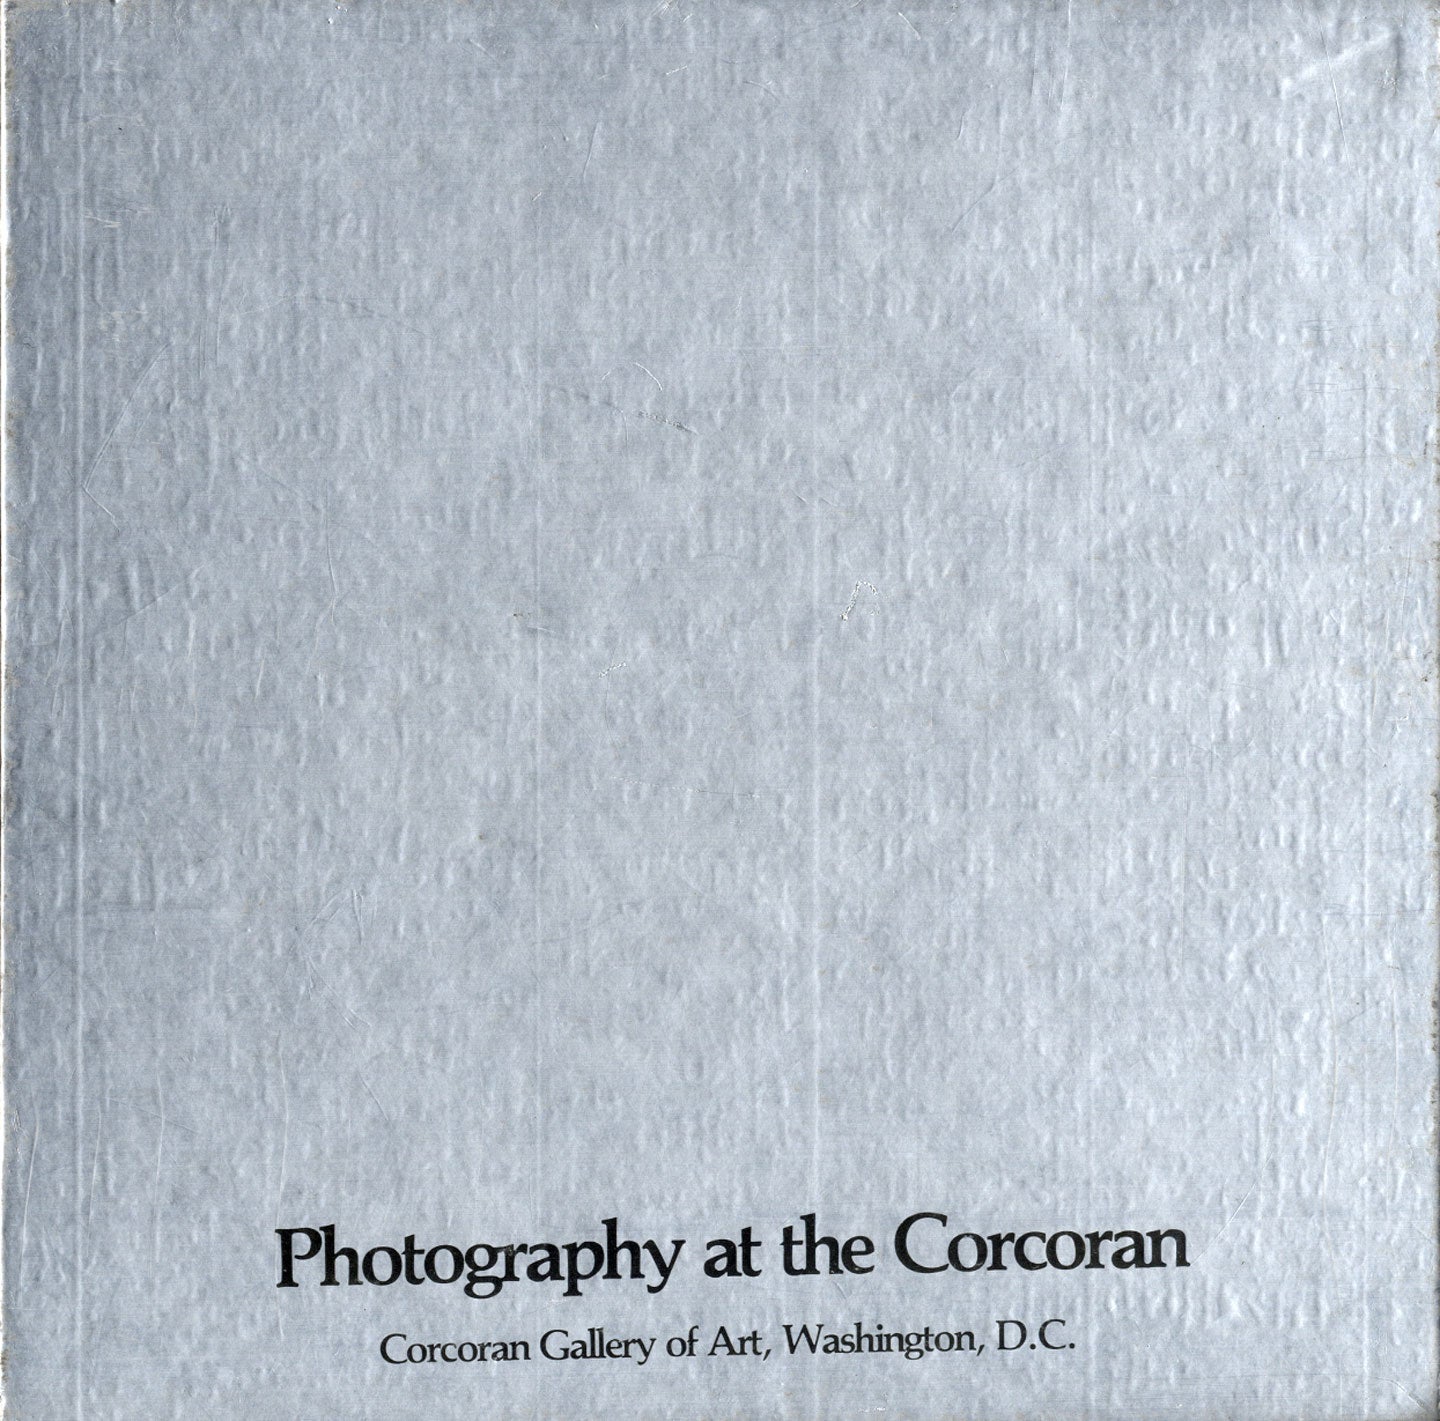 Photography at the Corcoran Series, Complete Boxed Set of 27 Catalogues (Includes all 8 catalogues from "The Nation's Capital in Photographs,1976")